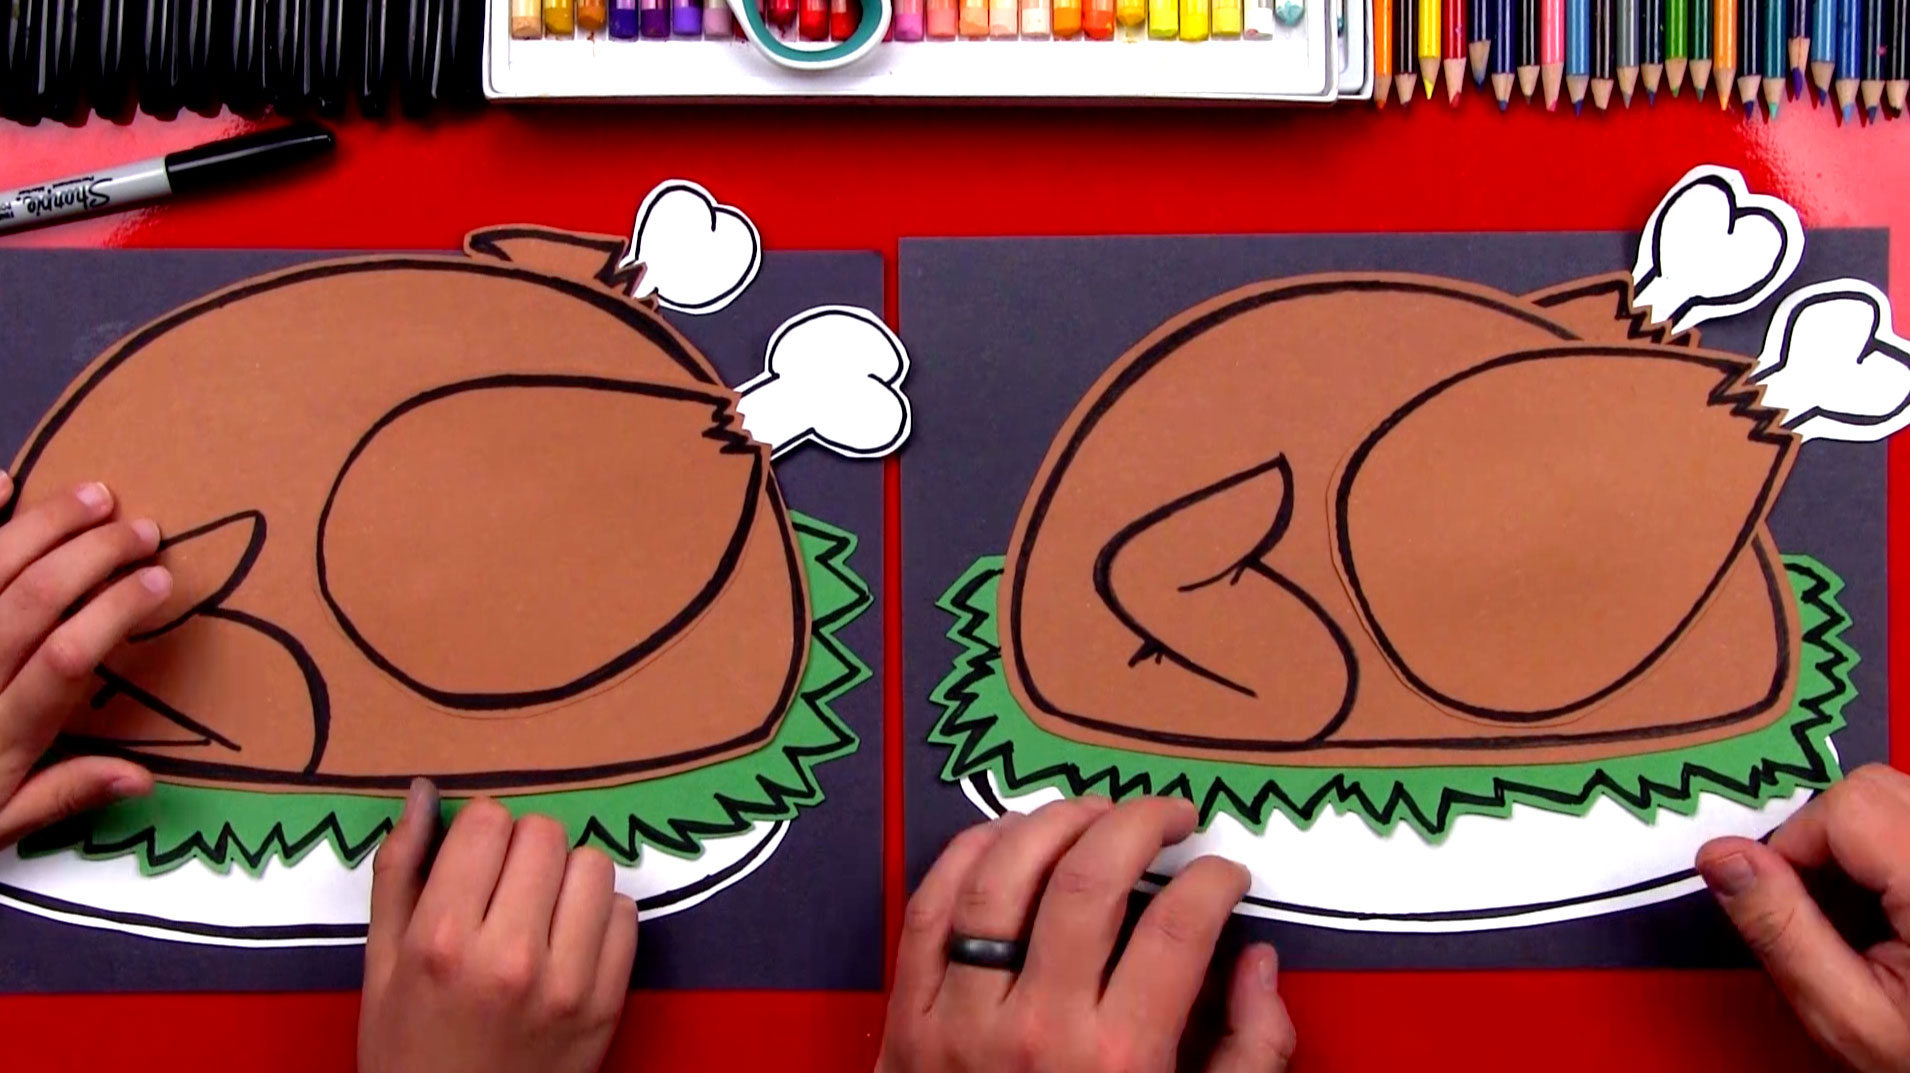 How To Draw A Cooked Turkey (Cutout)